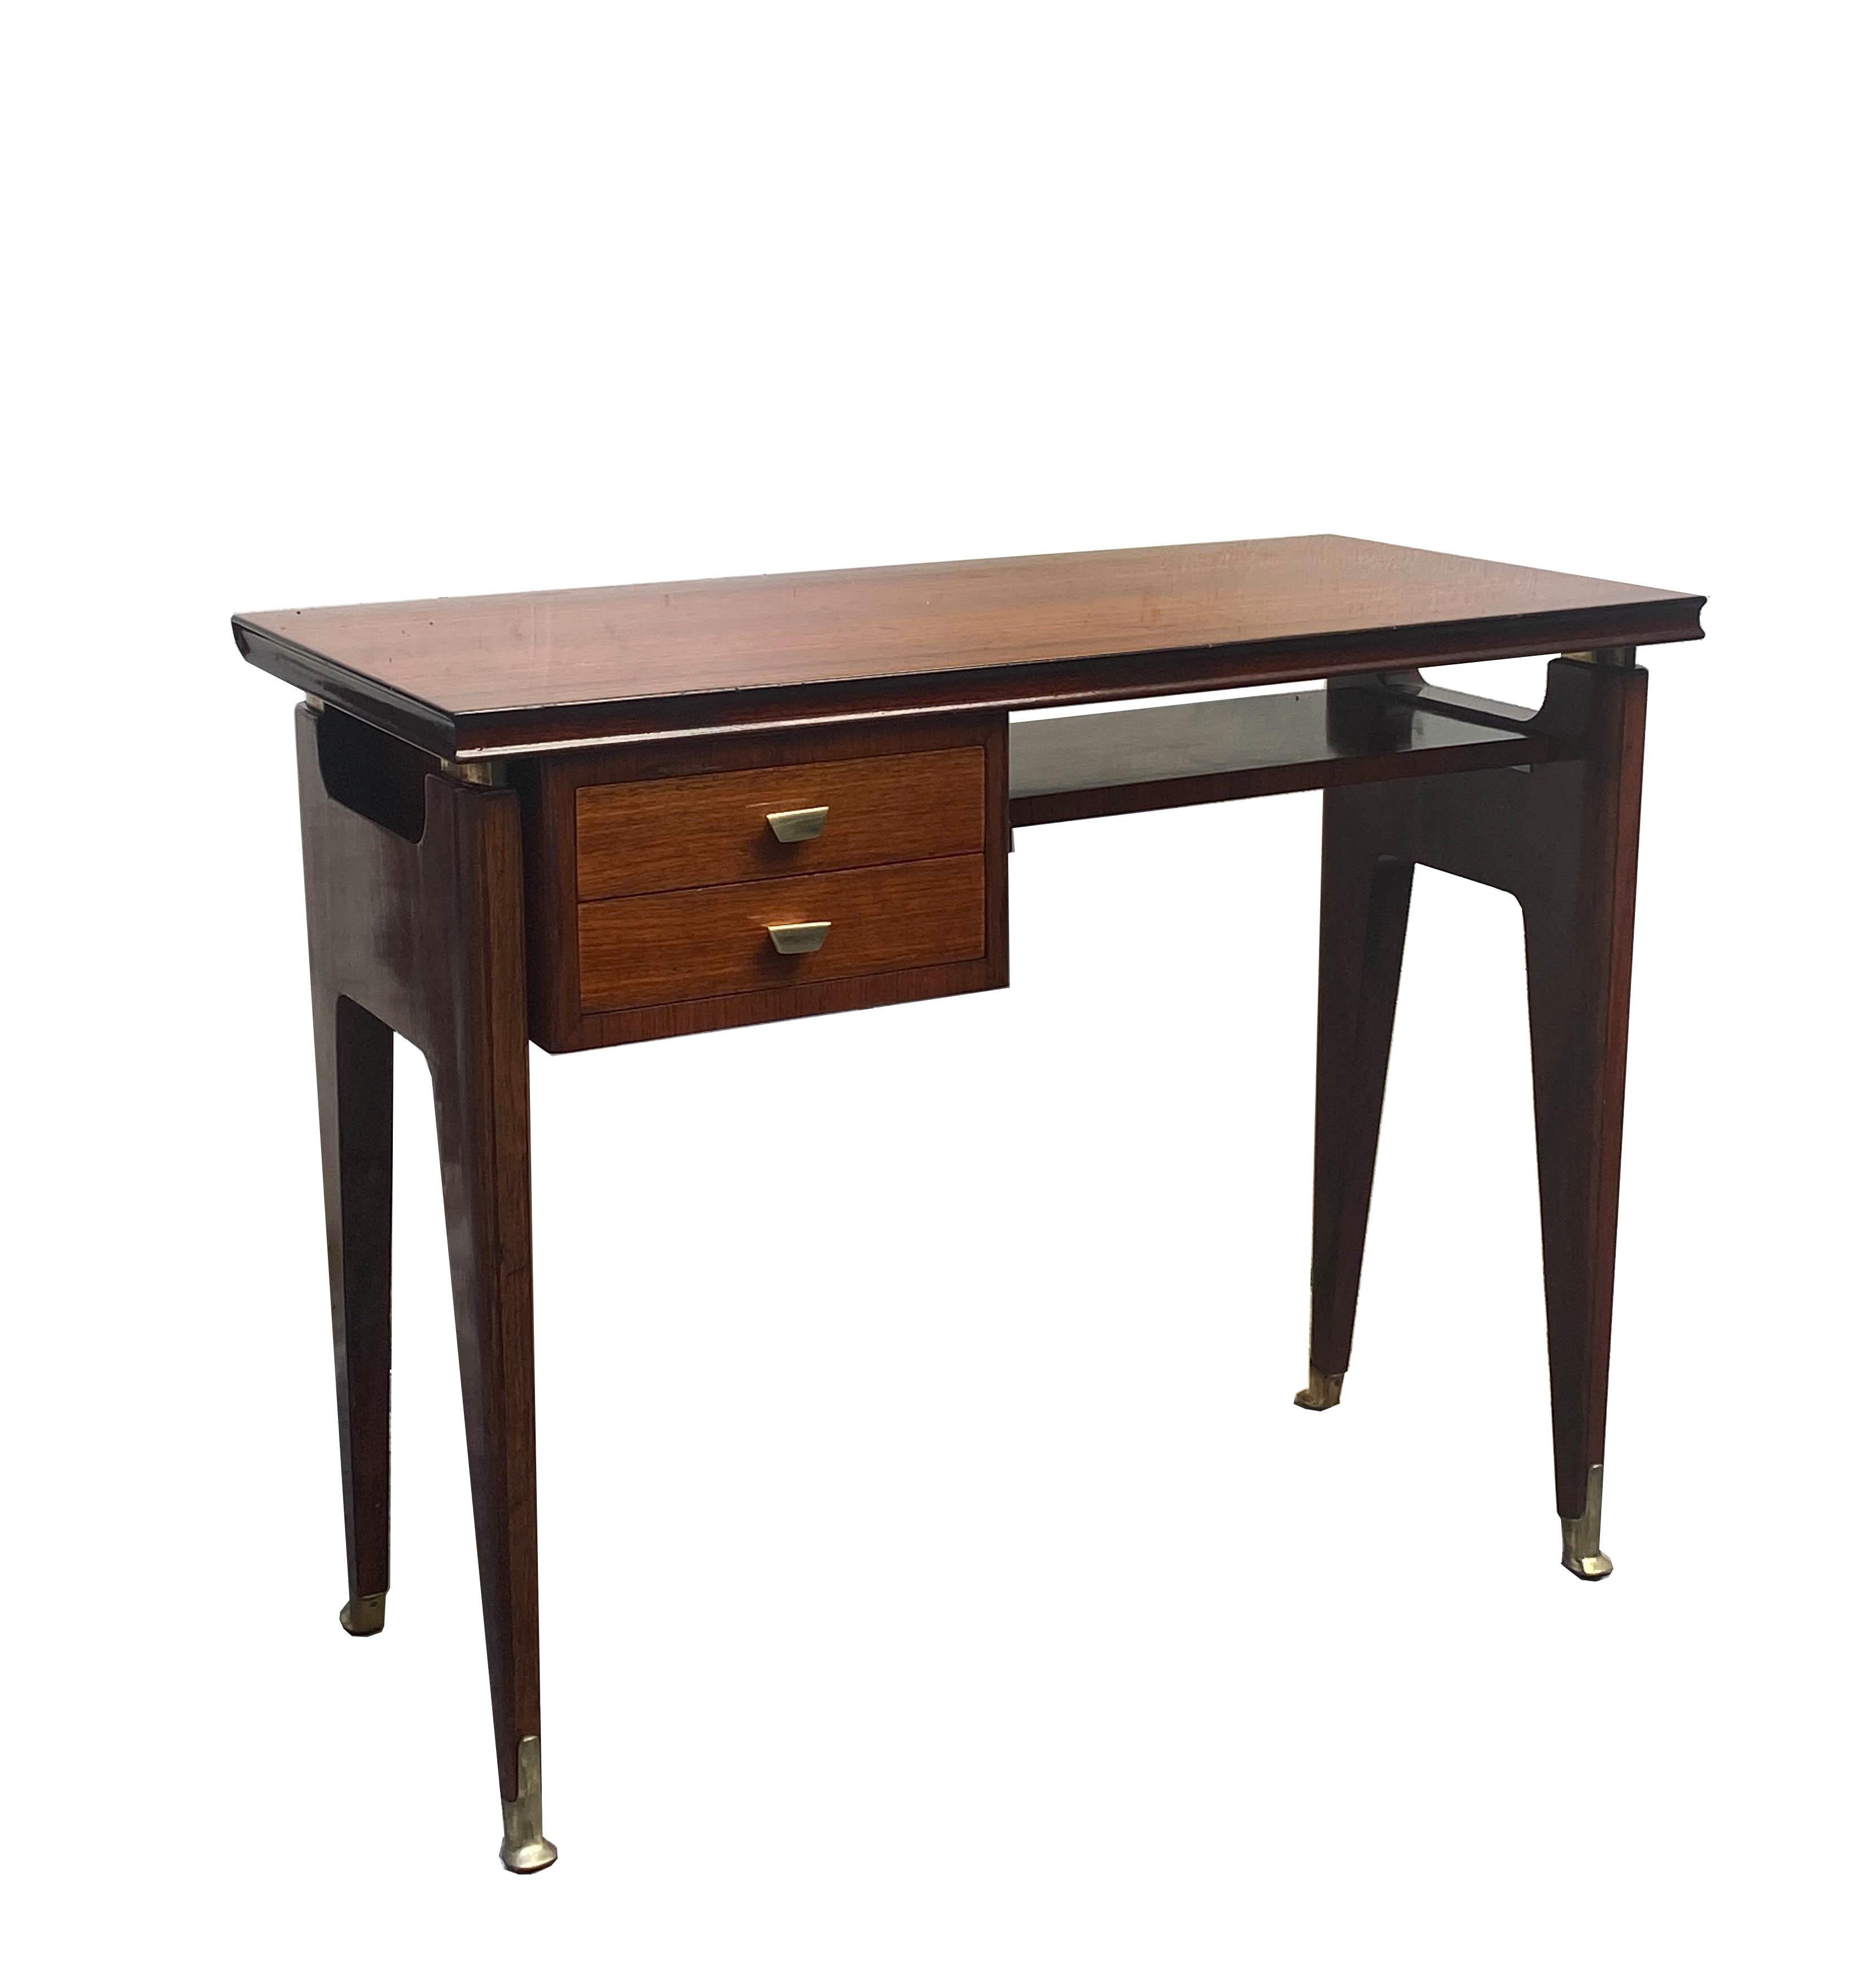 Small desk also called 'dattilo', very well designed by Vittorio Dassi in the 1950s. It has a solid structure finished and supported by brass feet and has two drawers on the left side. It is in very good vintage condition, with slight signs of wear